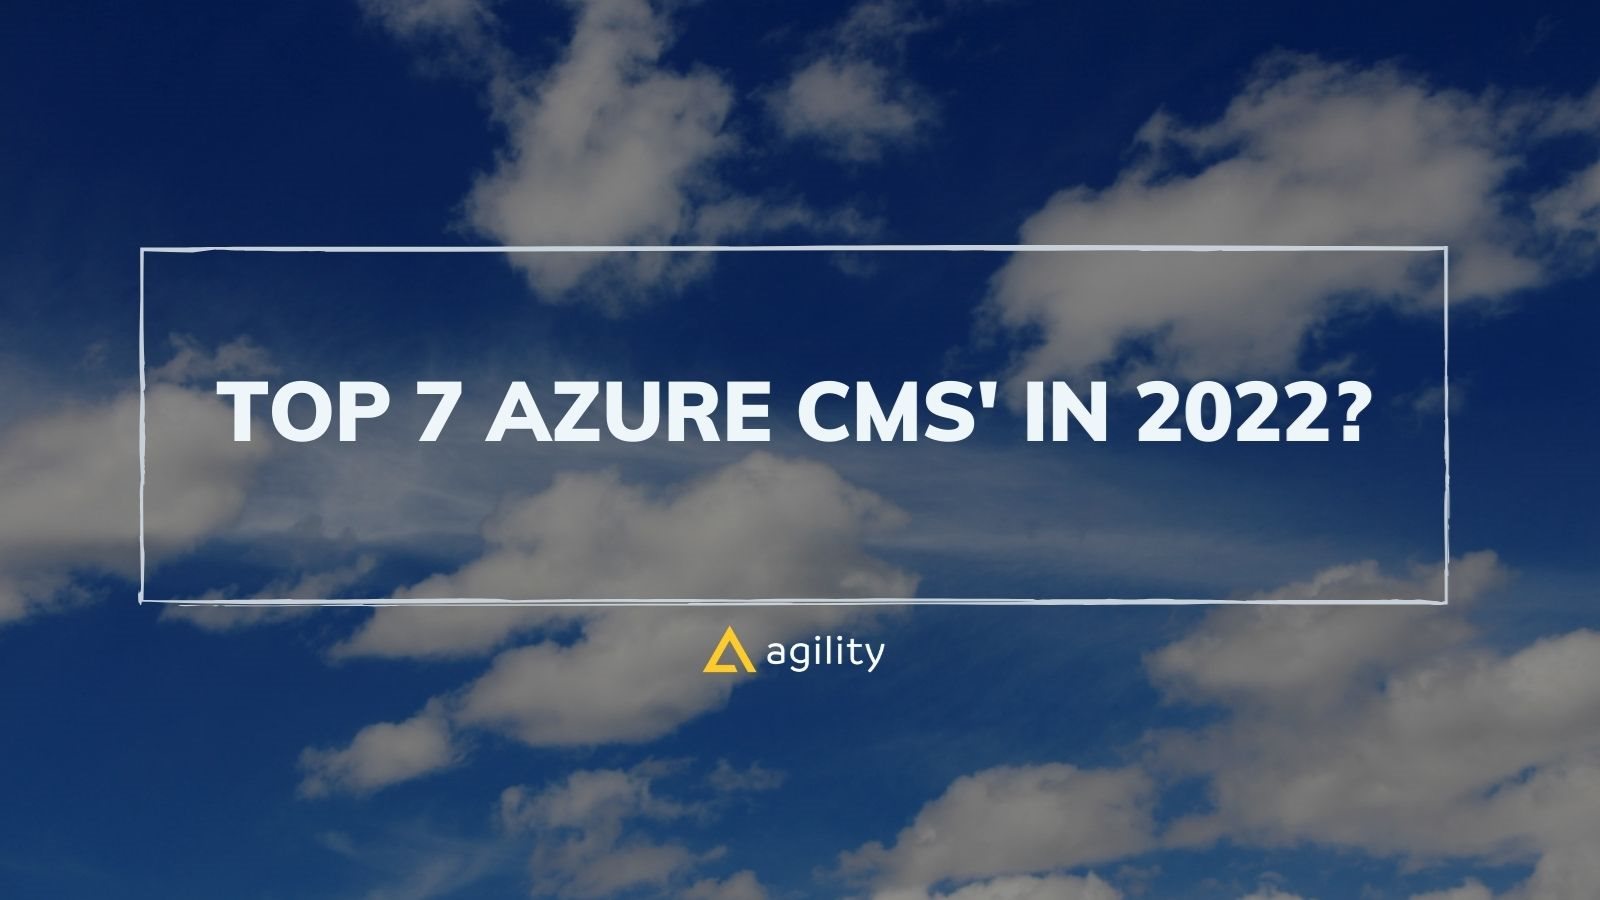 Top 7 Azure CMSs in 2022